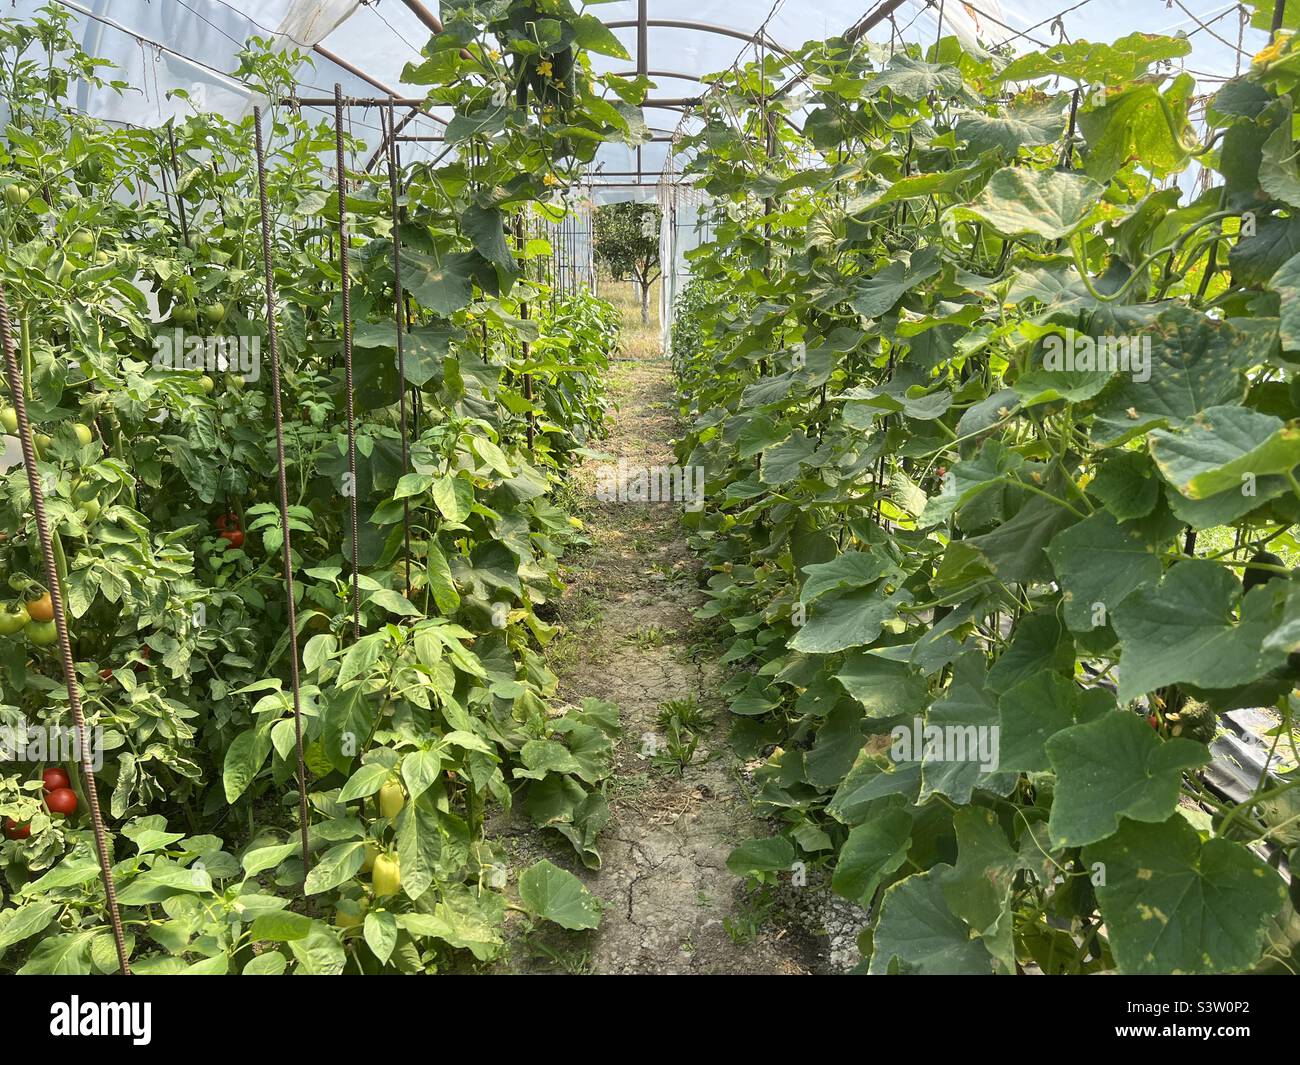 Greenhouse in the garden with plants of tomatoes, peppers and gherkins Stock Photo